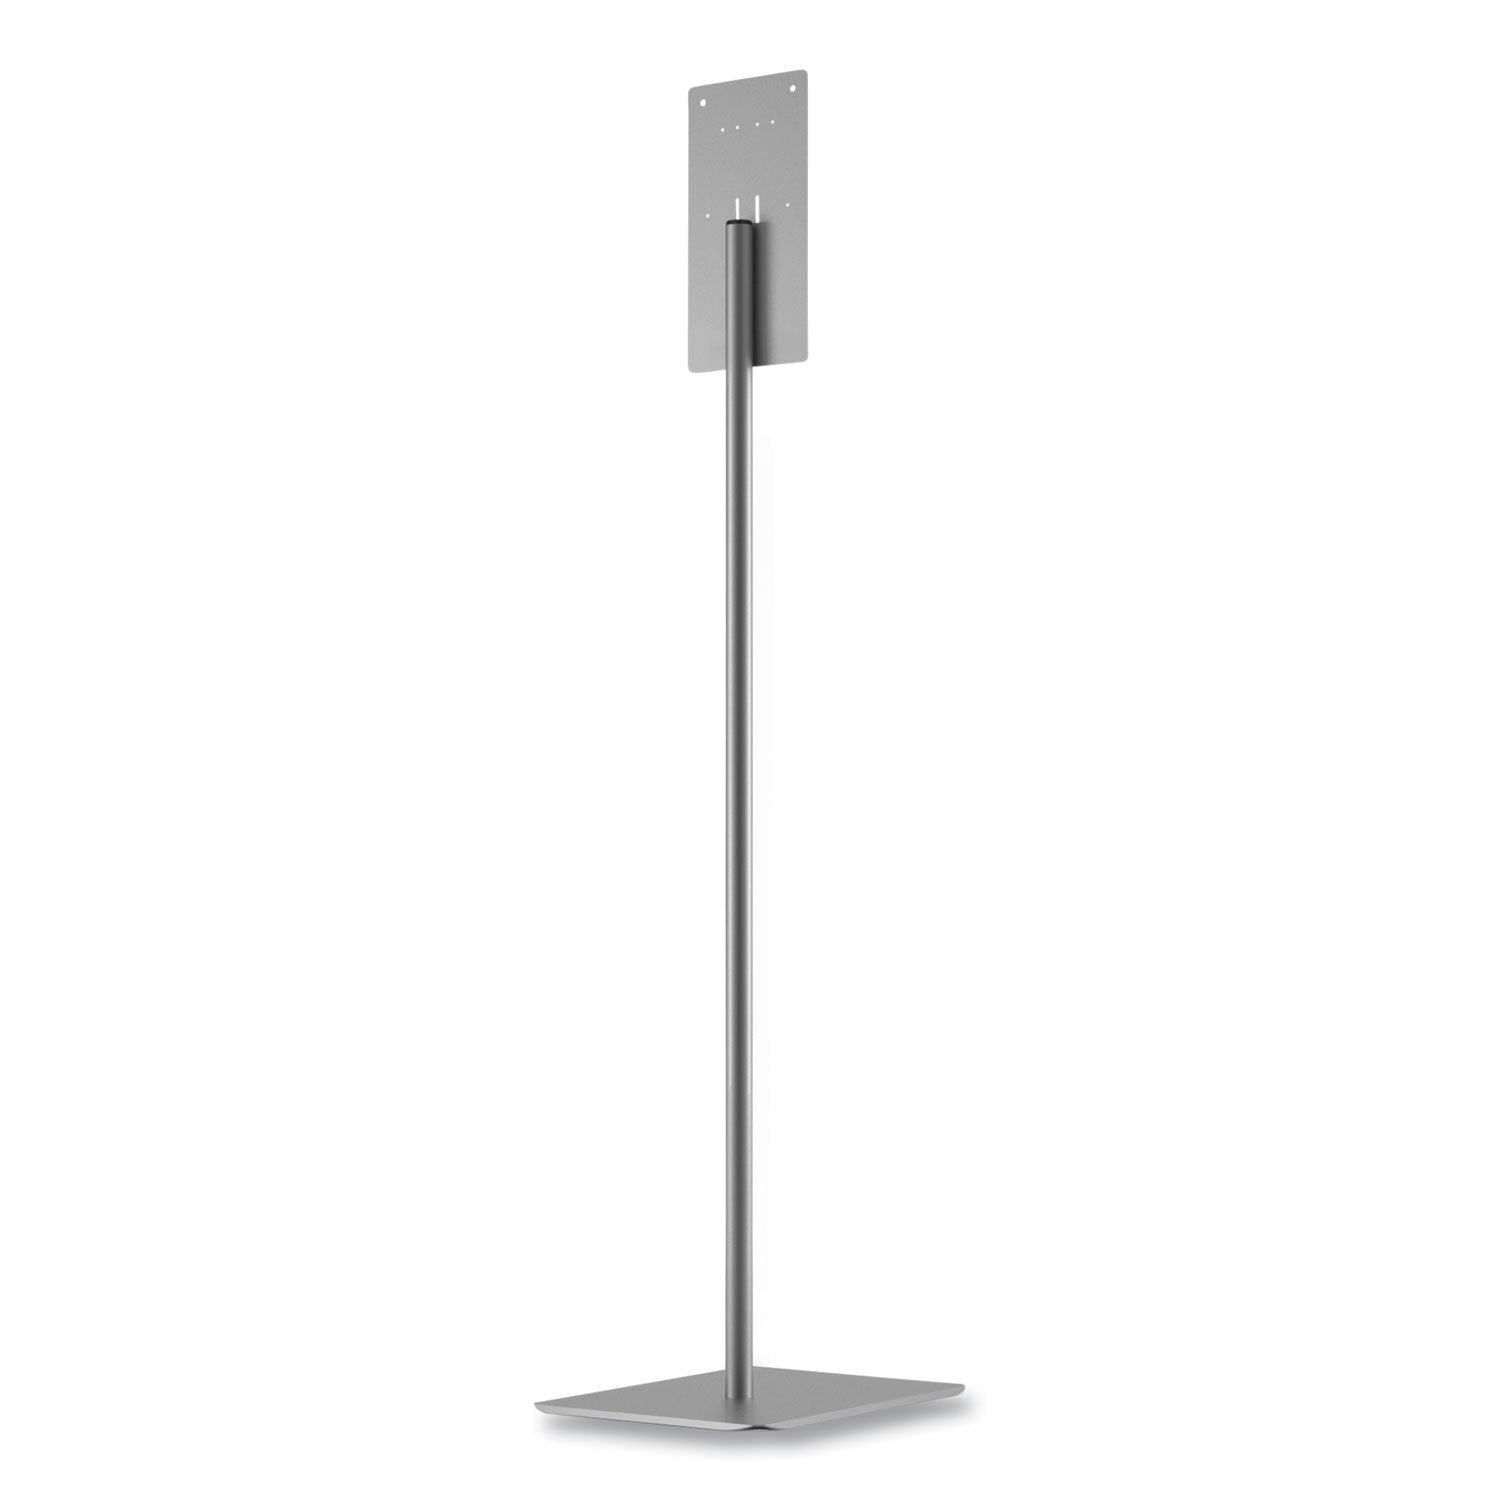 hand-sanitizer-station-stand-12-x-16-x-54-silver_honstandp8t - 4